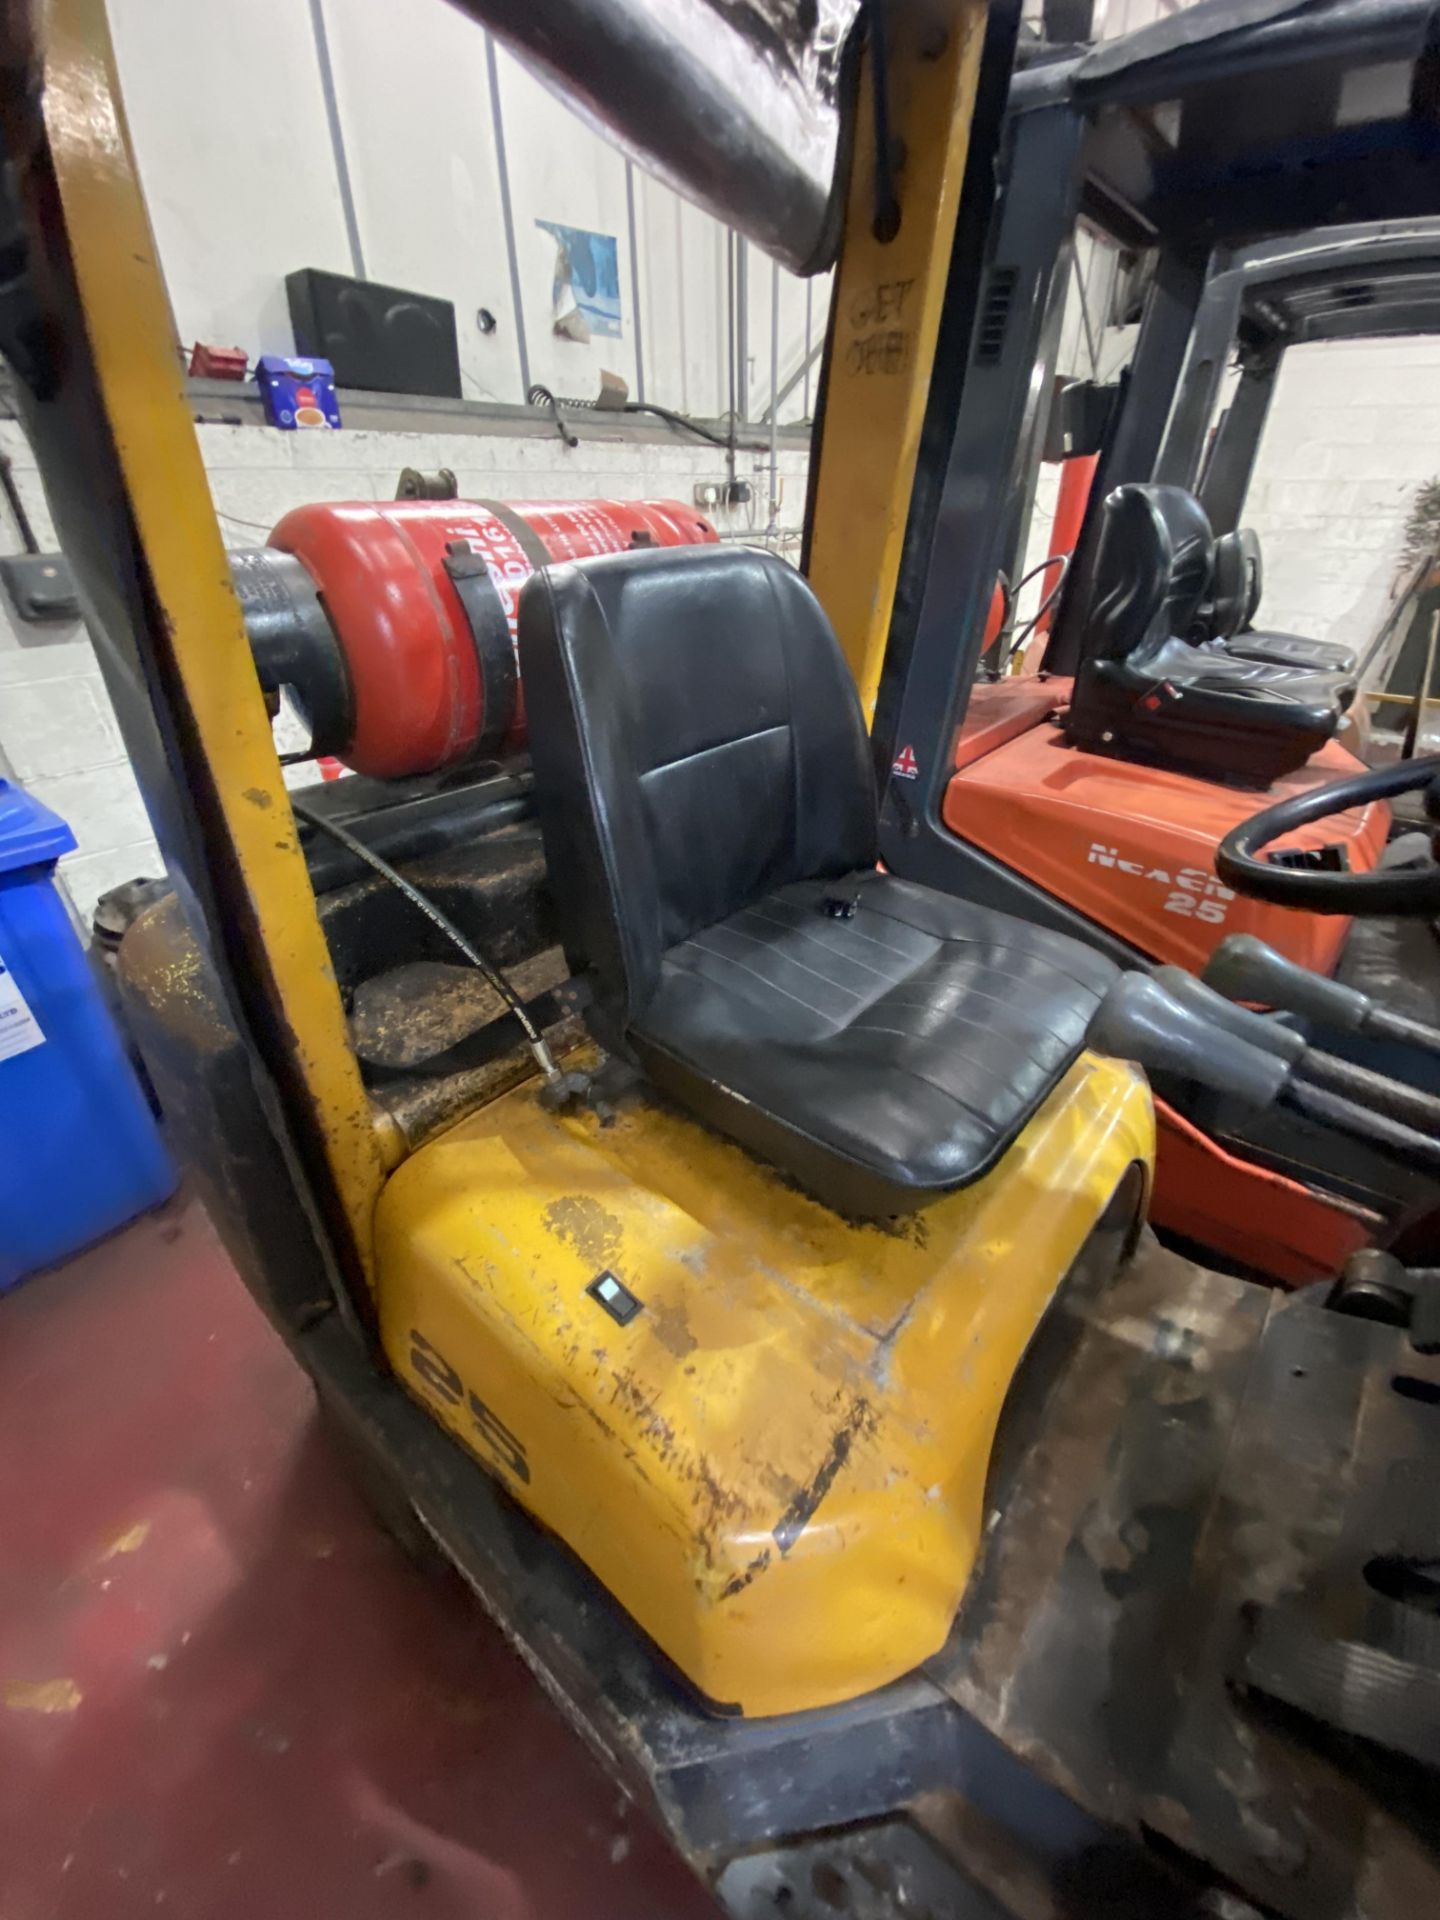 TCM FCG25F9 1600kg cap. LPG Fork Lift Truck, serial no. A12W03014, year of manufacture 2001, - Image 5 of 9